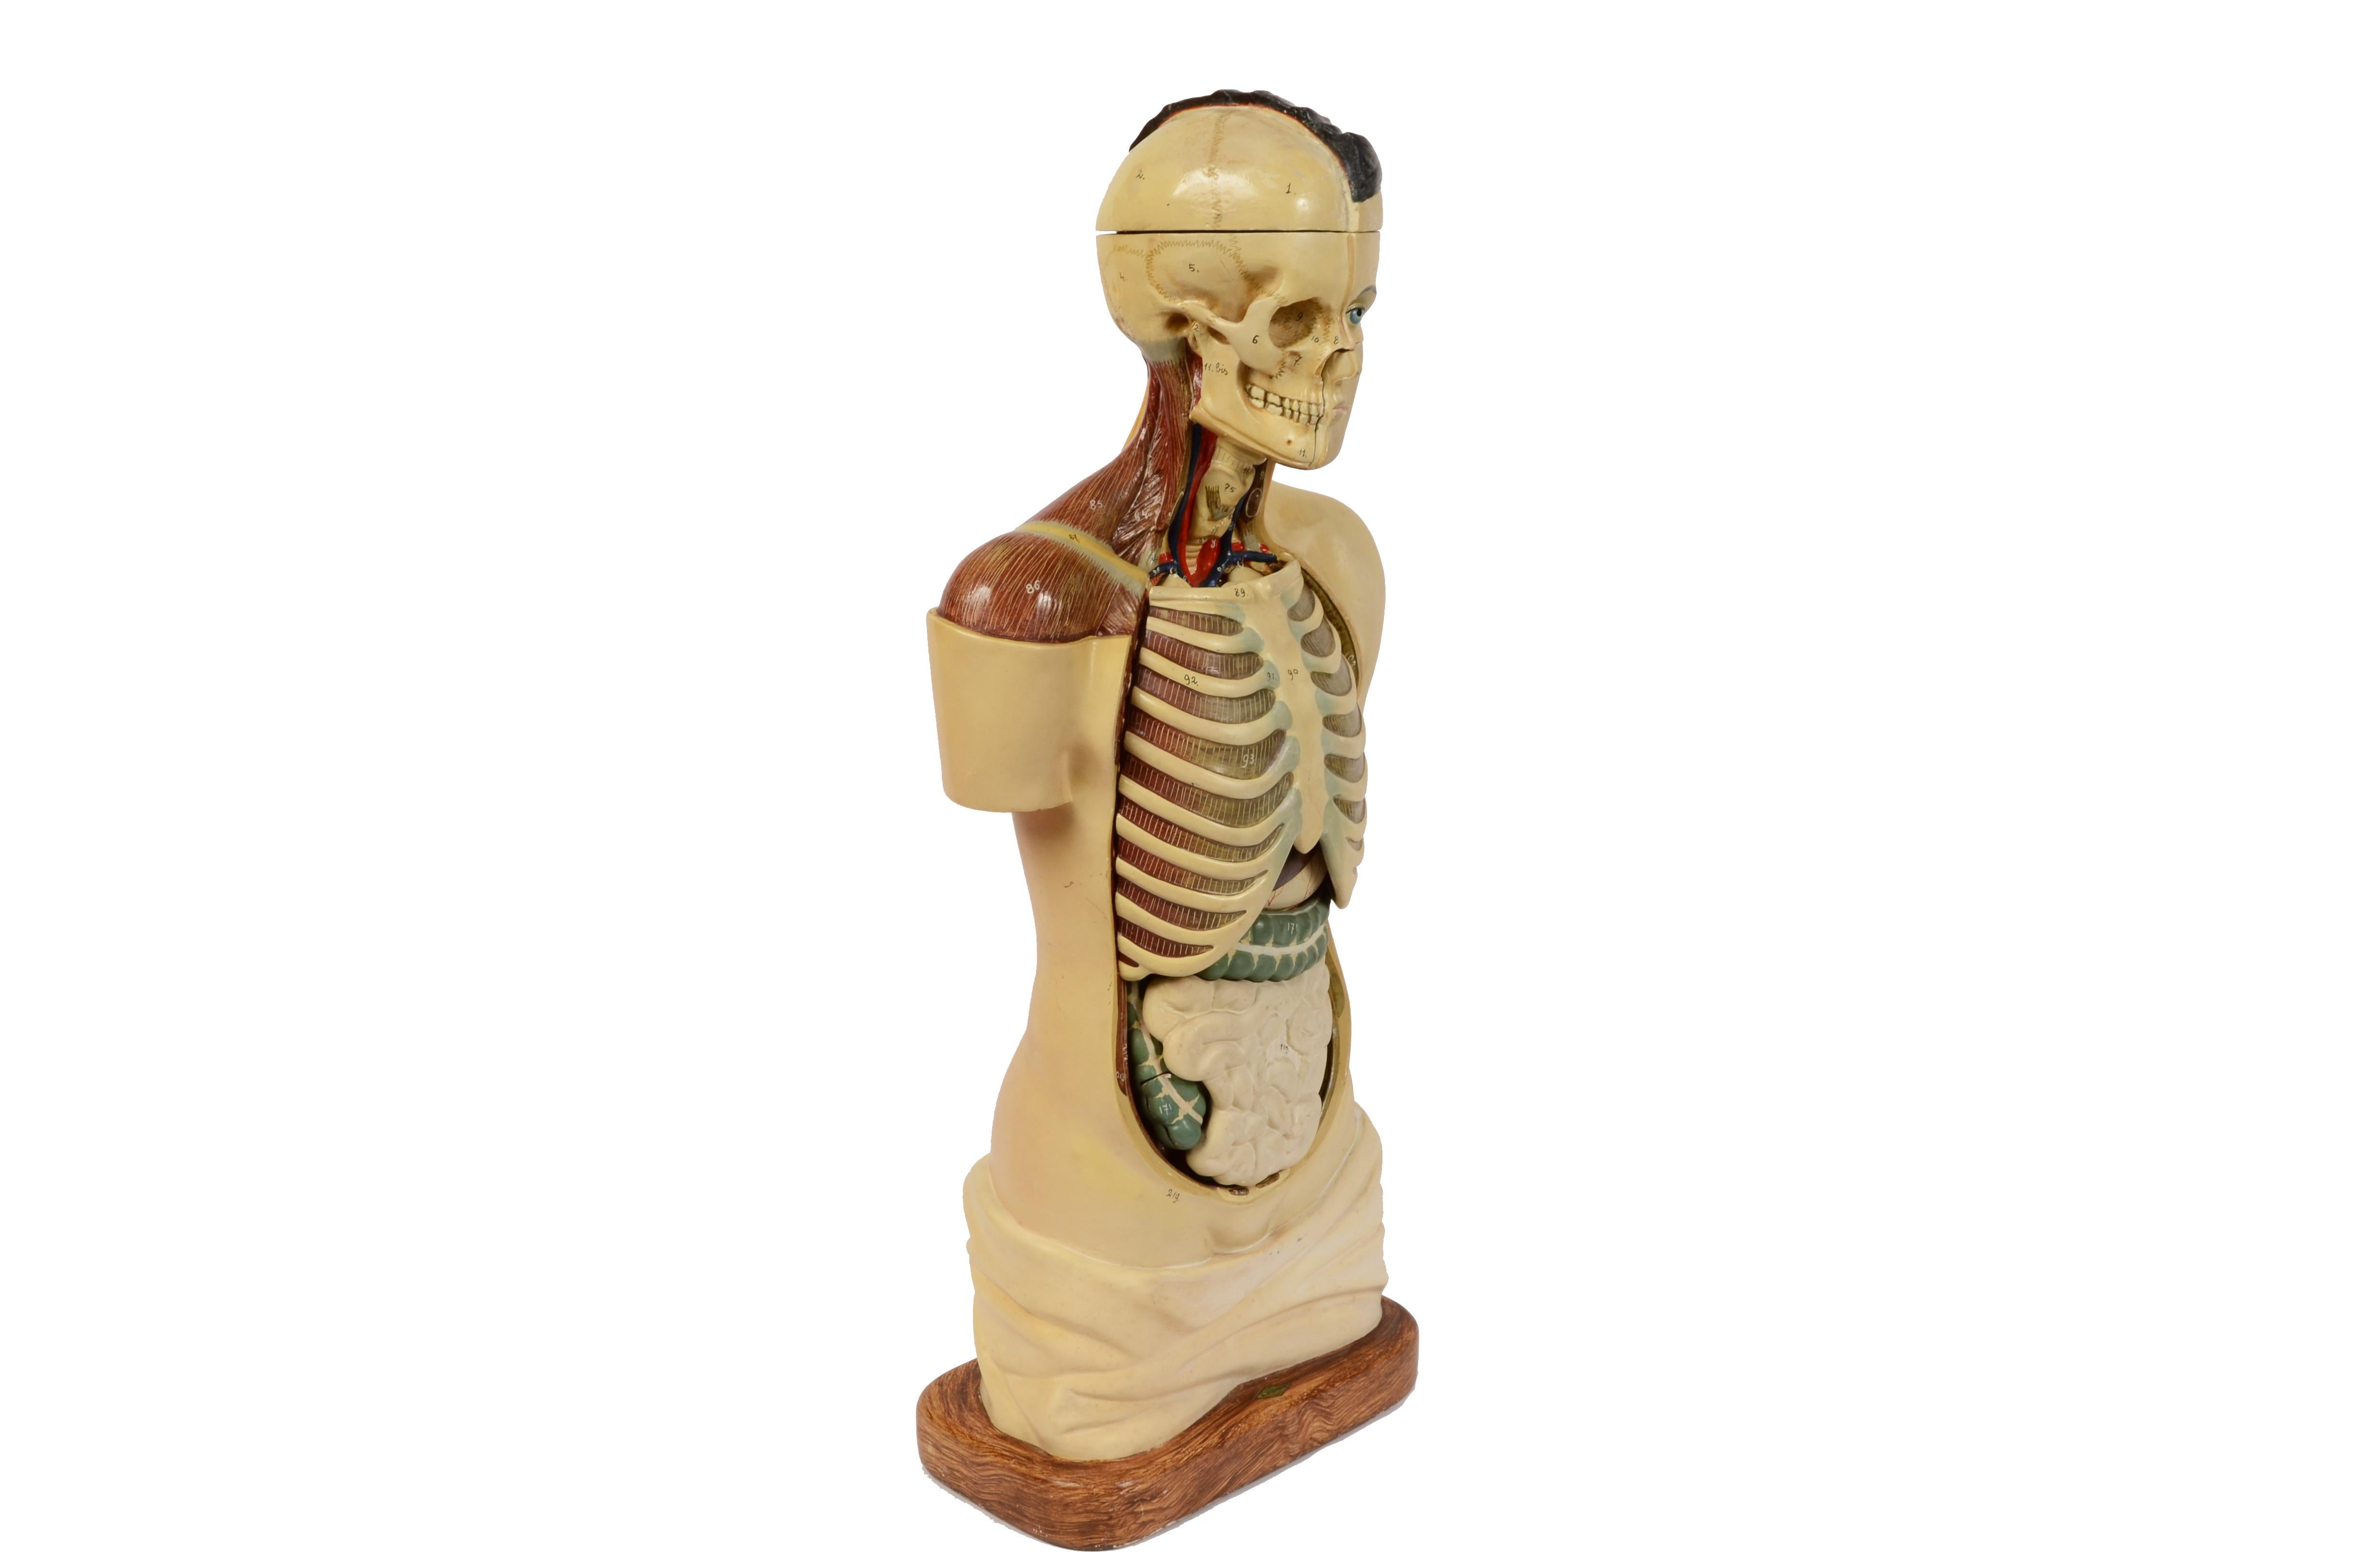 1900s Didactic Anatomical Torso with Removable Organs Scale 1:1 A. Fumeo Milano 3